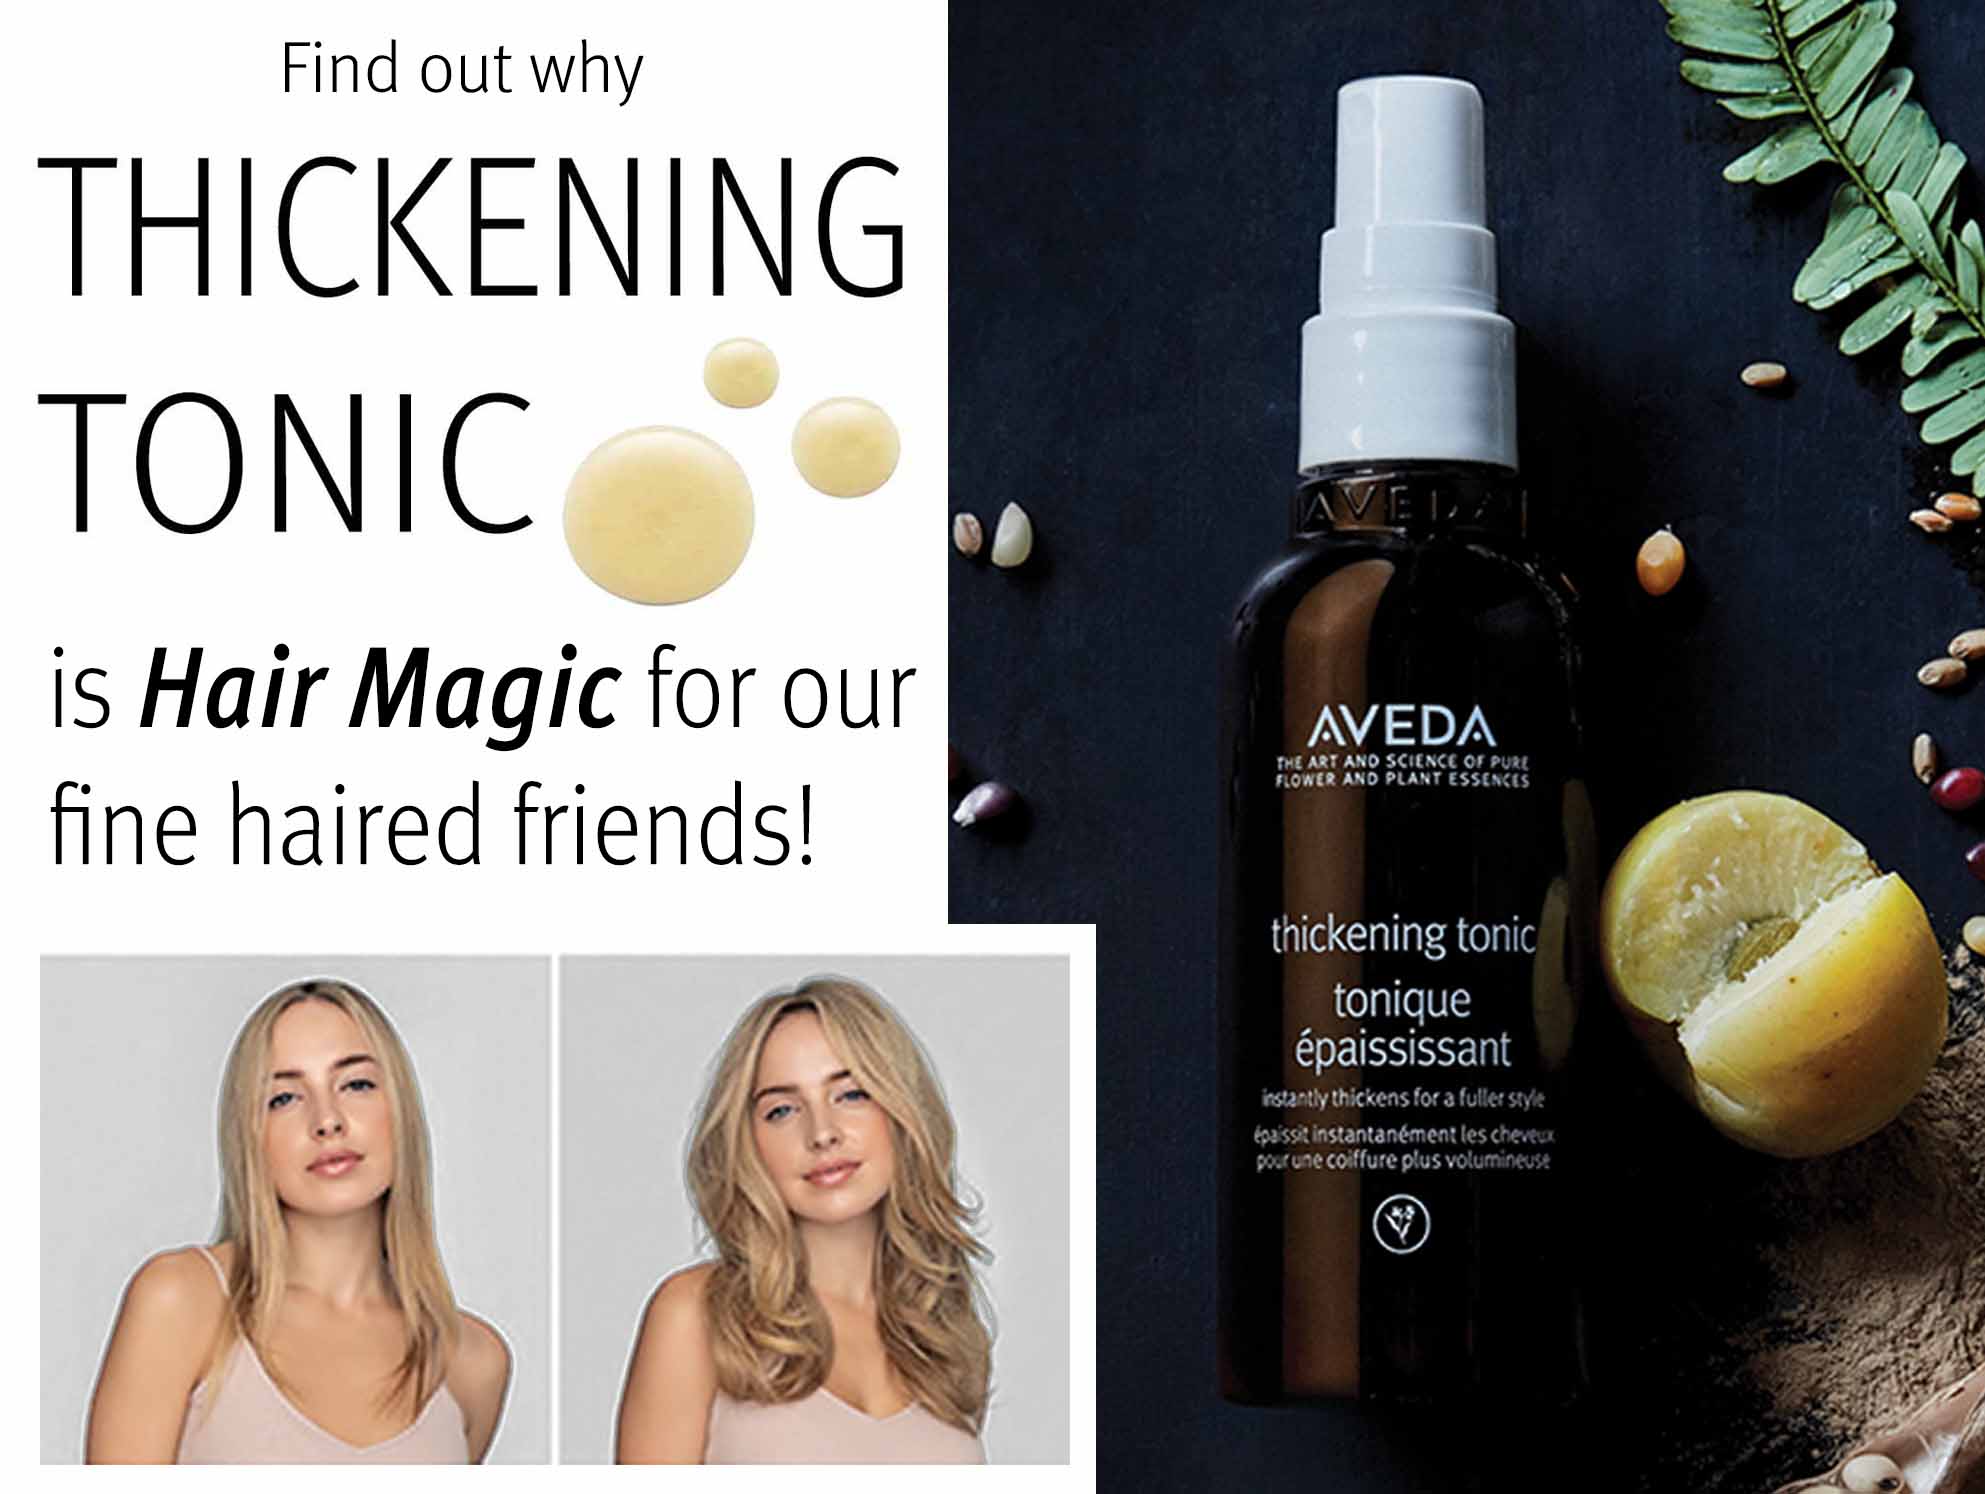 Blog Image of Aveda thickening tonic hair product and how it thickens your hair